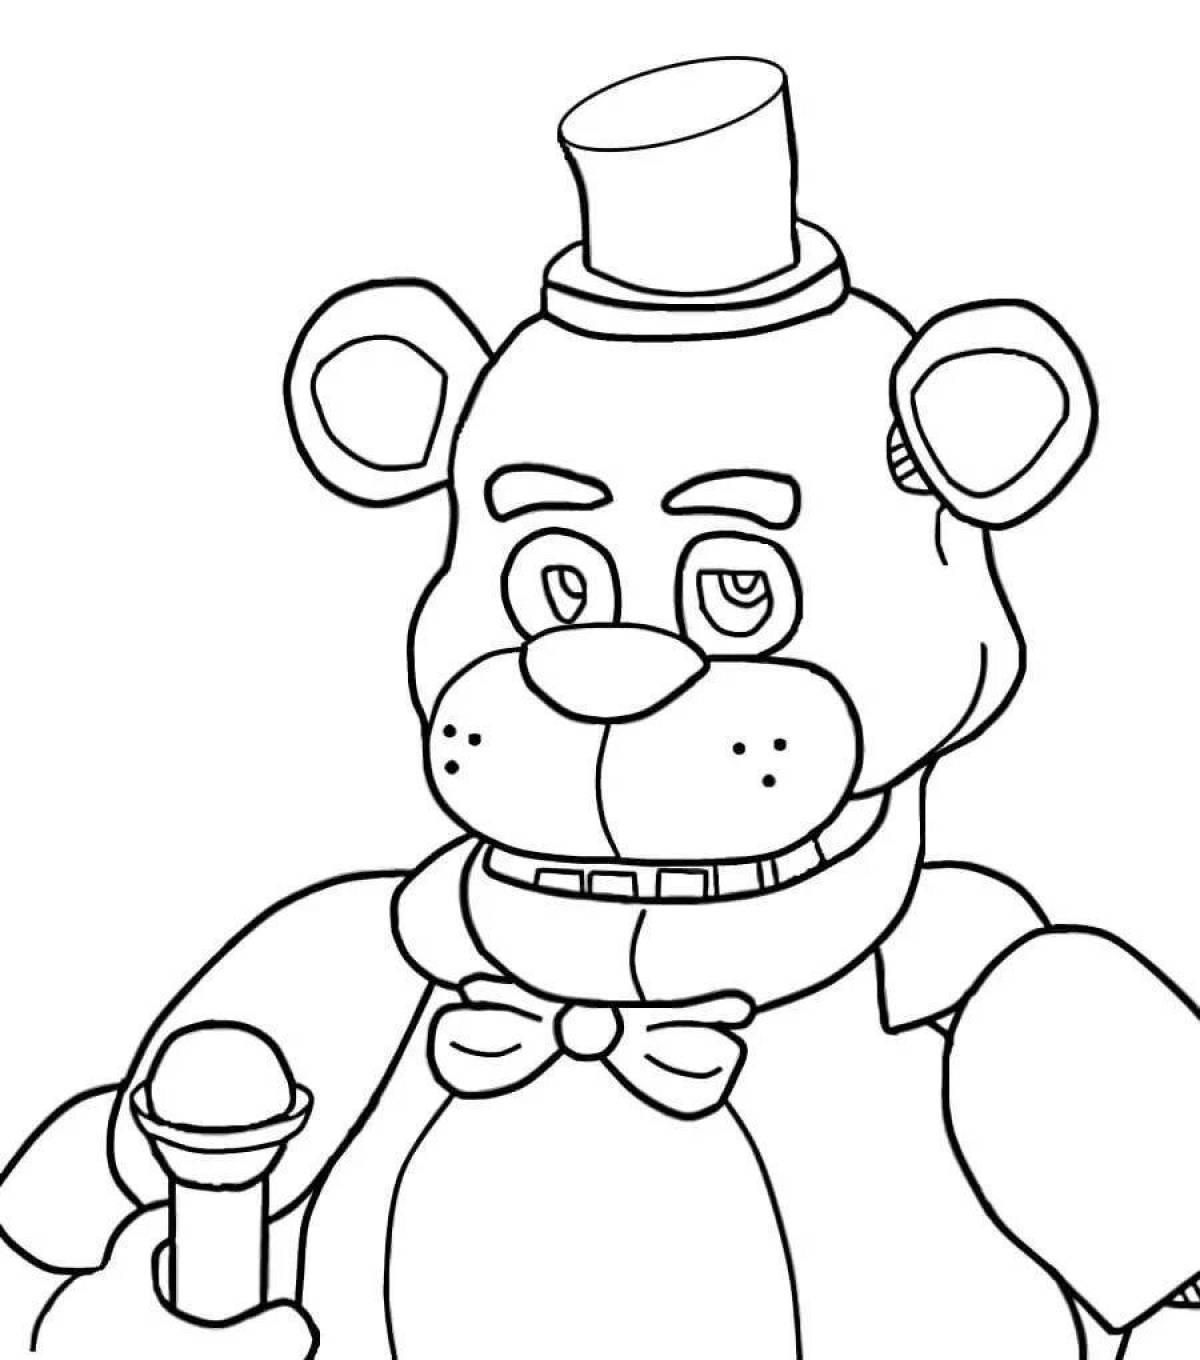 Animated freddy bear coloring page